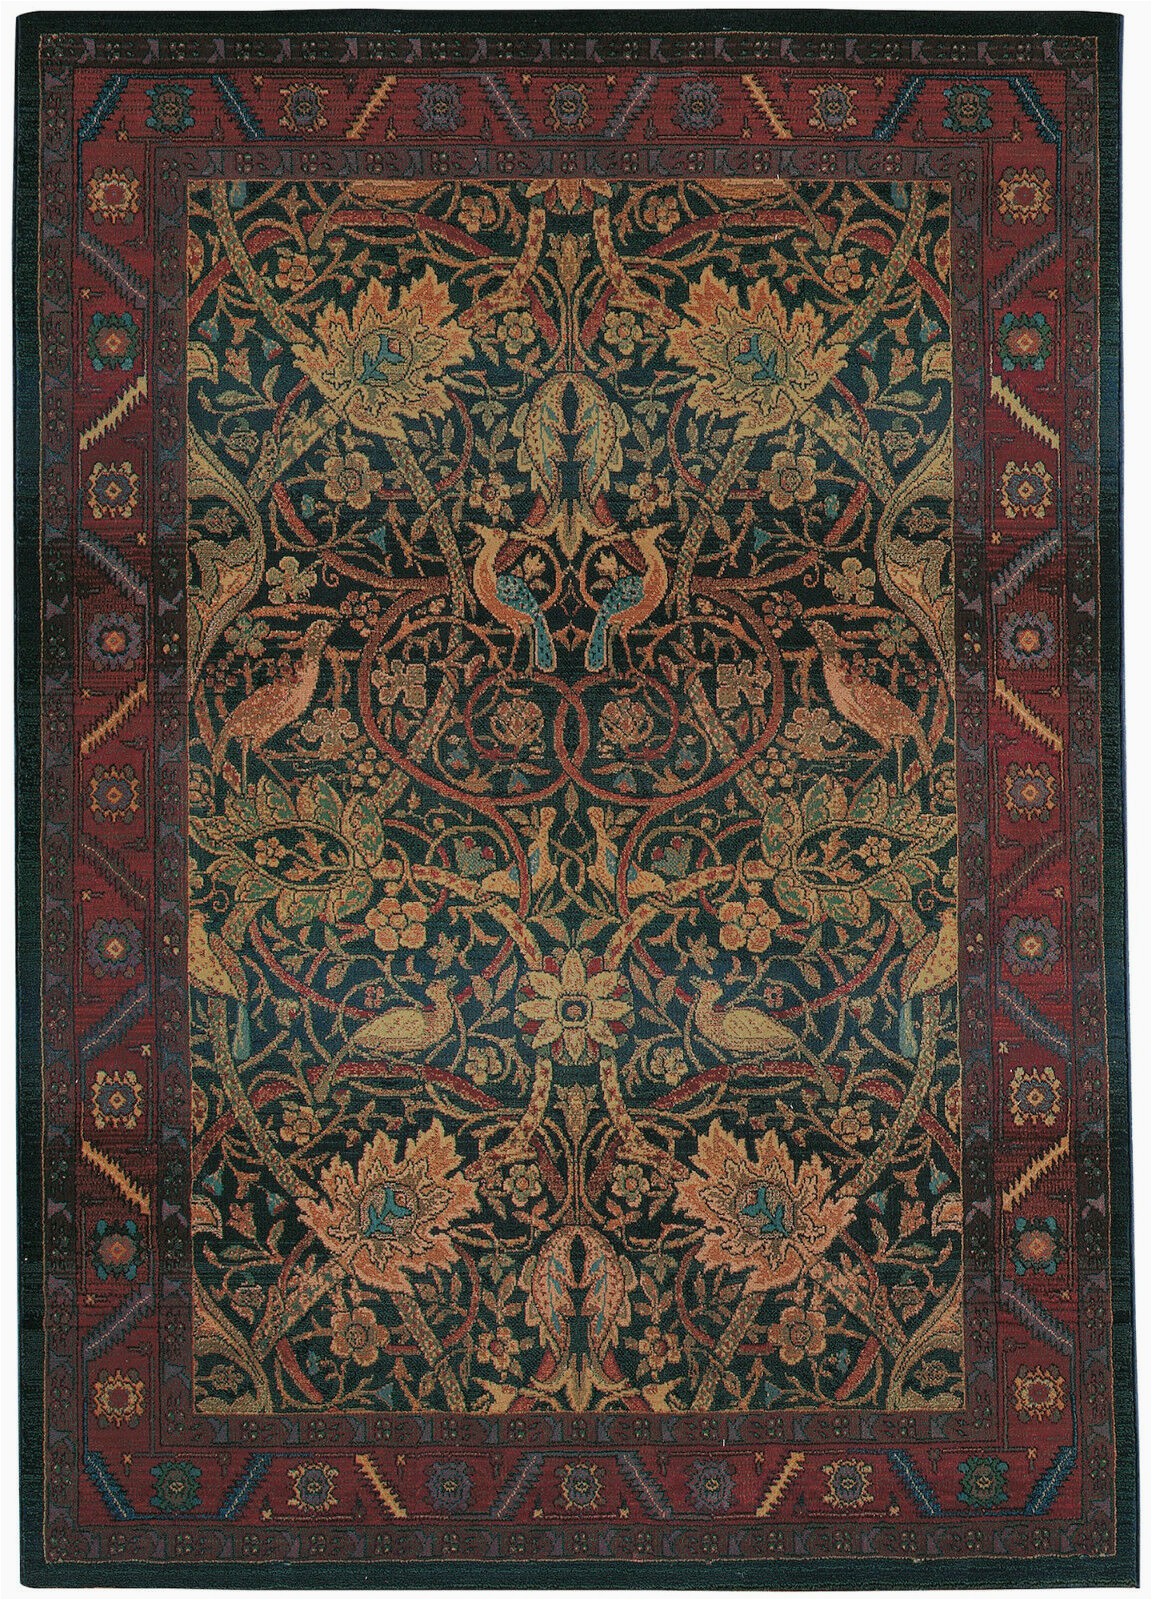 Mission Style area Rugs for Sale William Morris Style Arts & Crafts Mission area Rug Free Shipping